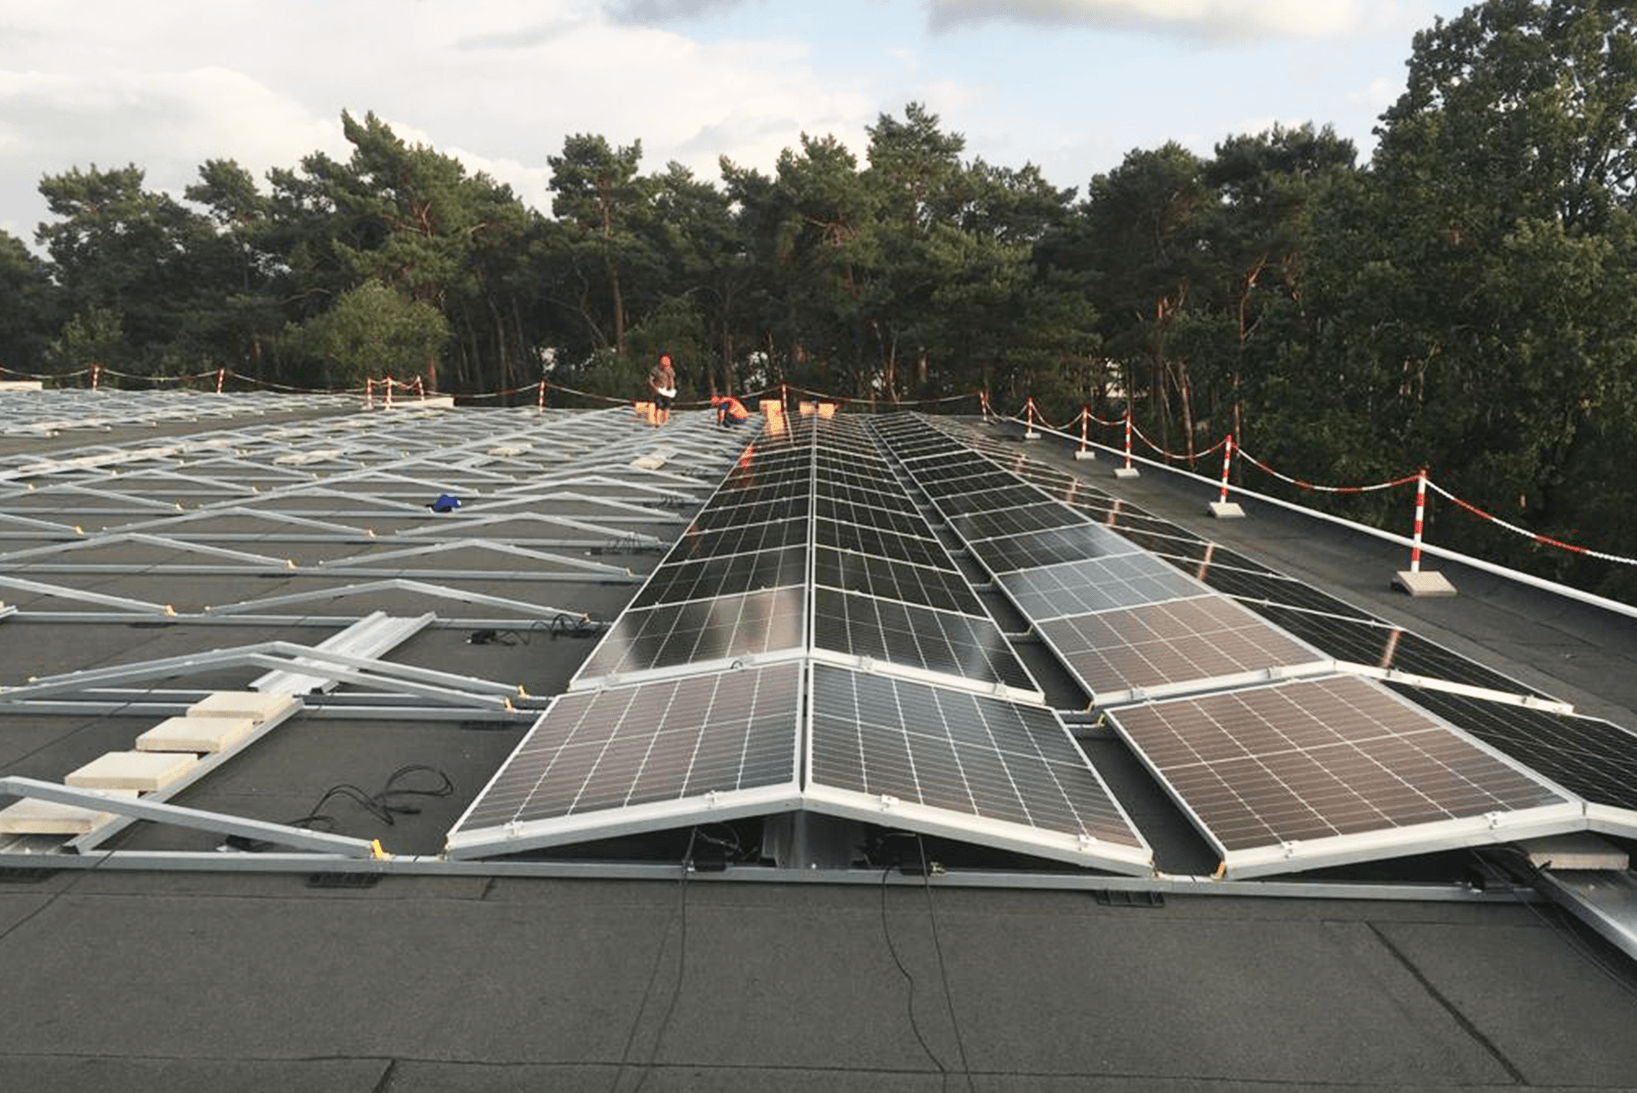 HDSolar's cooperation with Greenbuddies continues